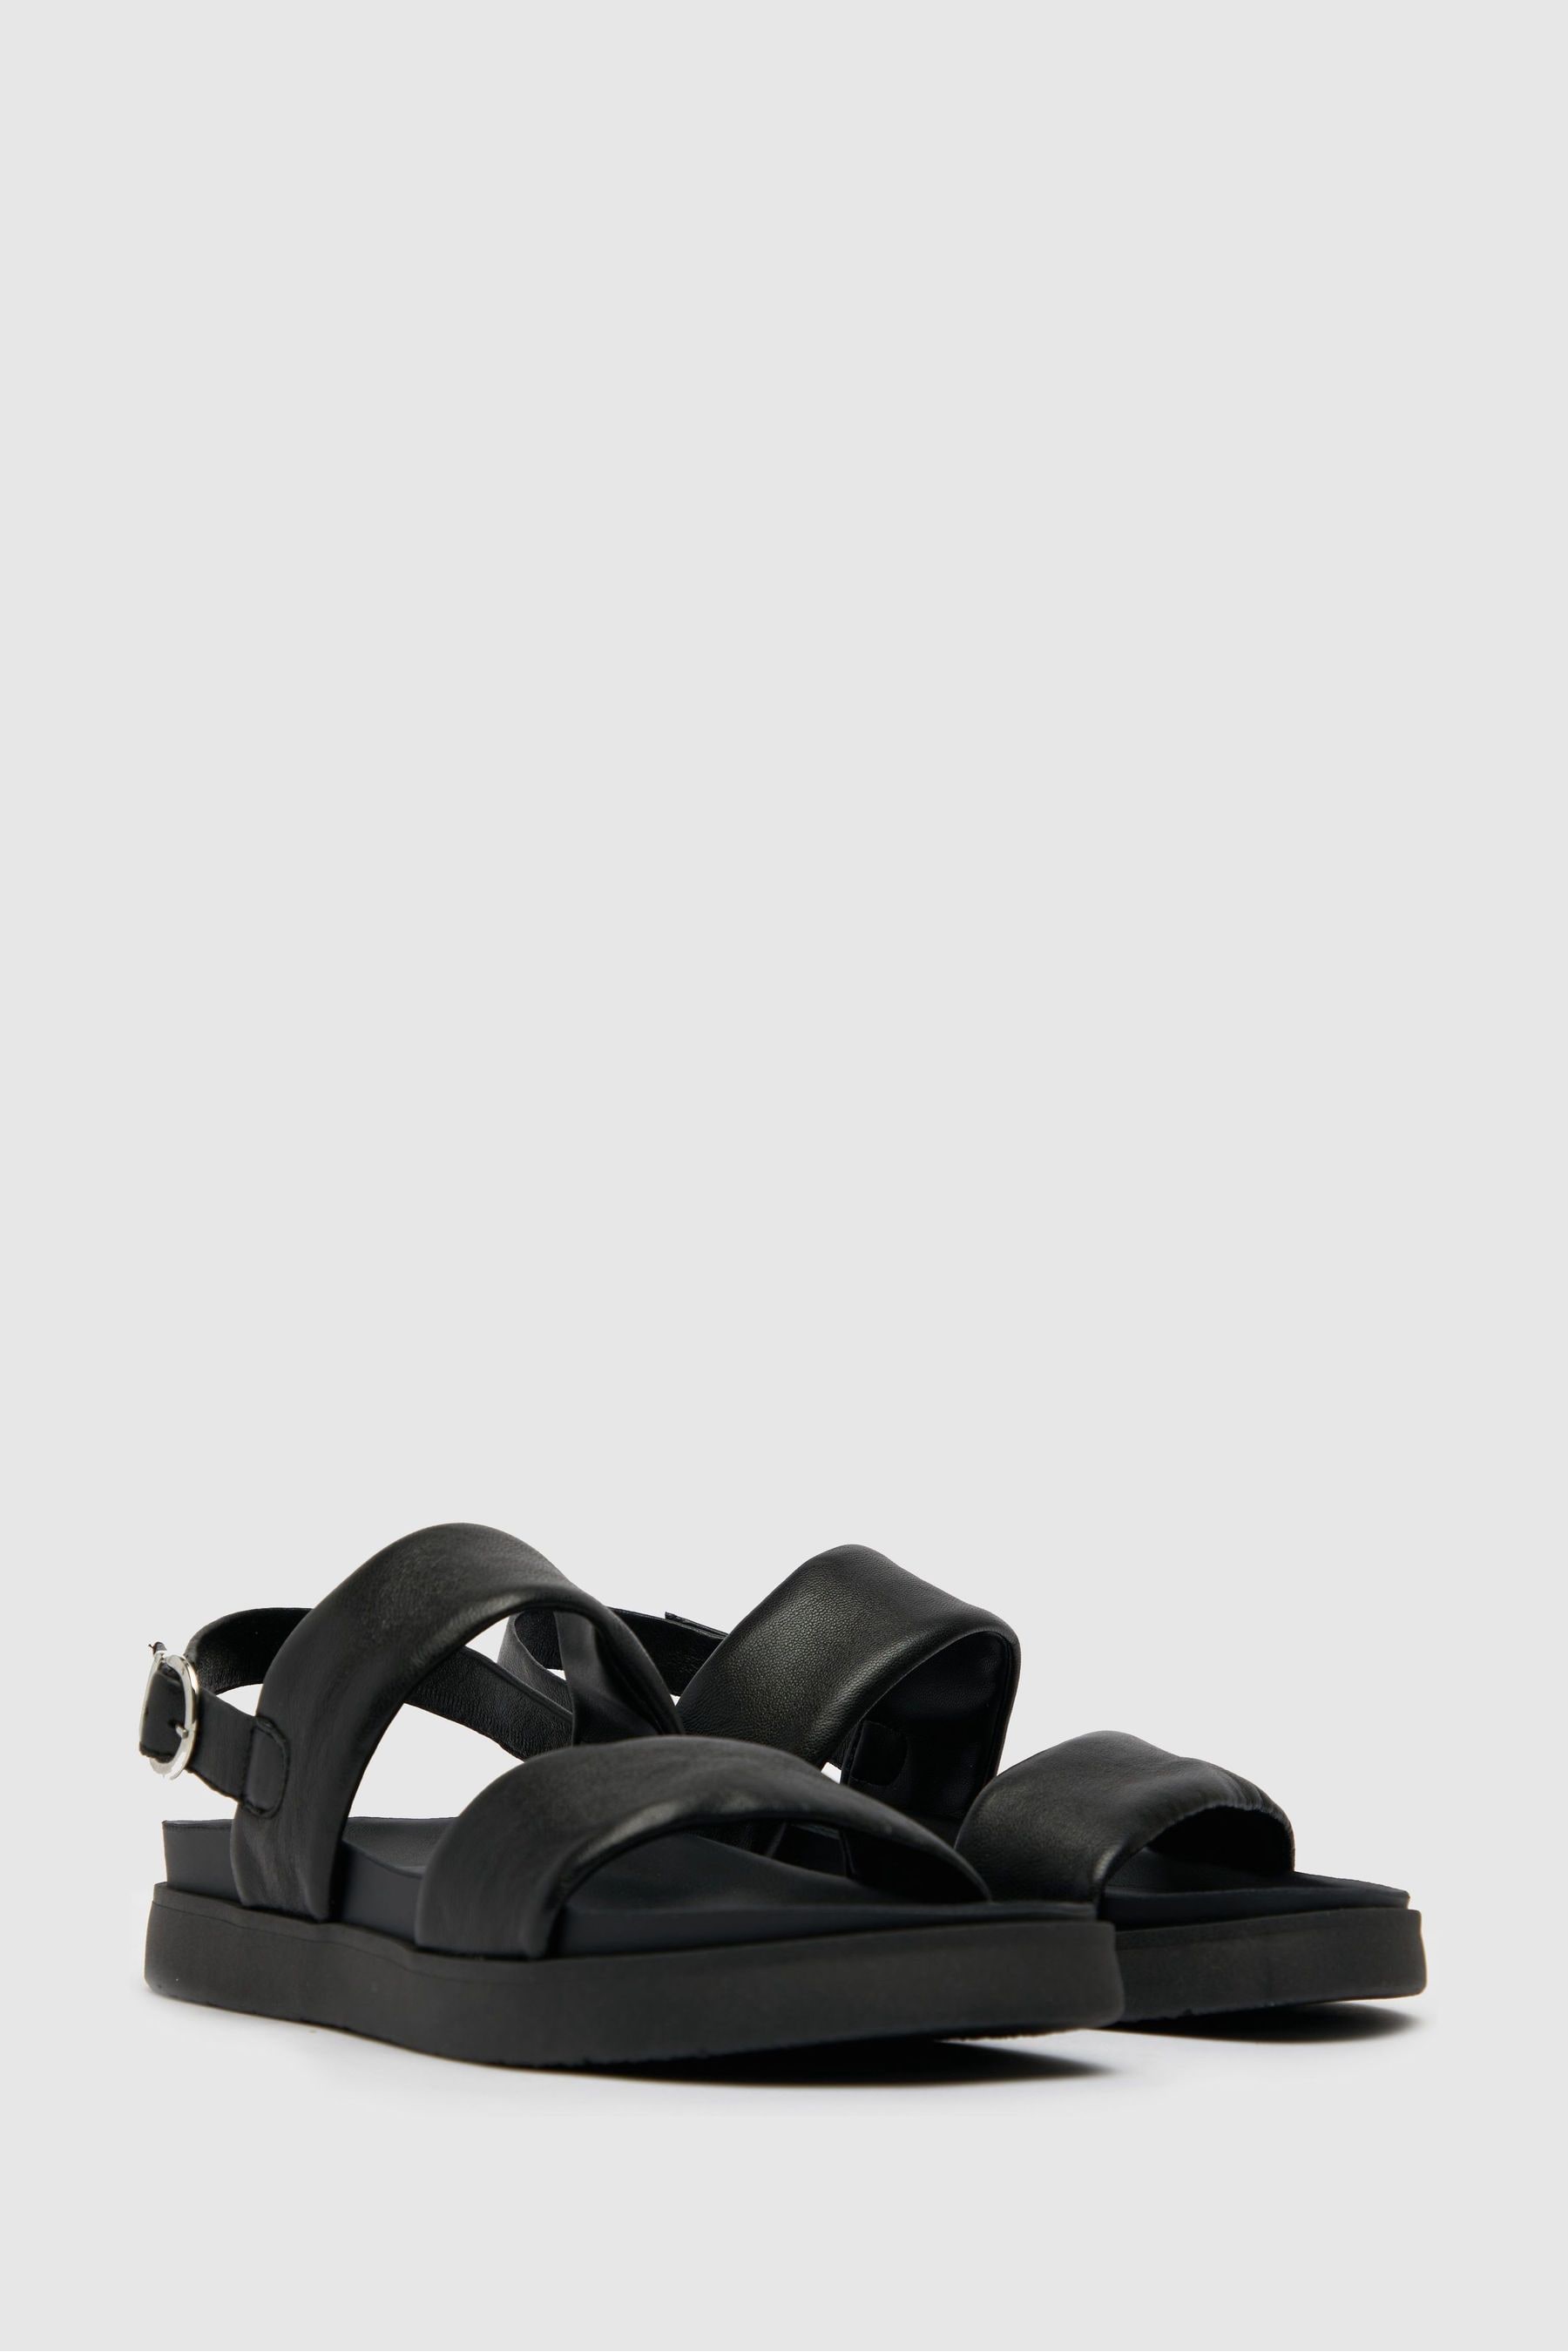 Buy Schuh Tasha Leather Double Band Sandals from the Next UK online shop